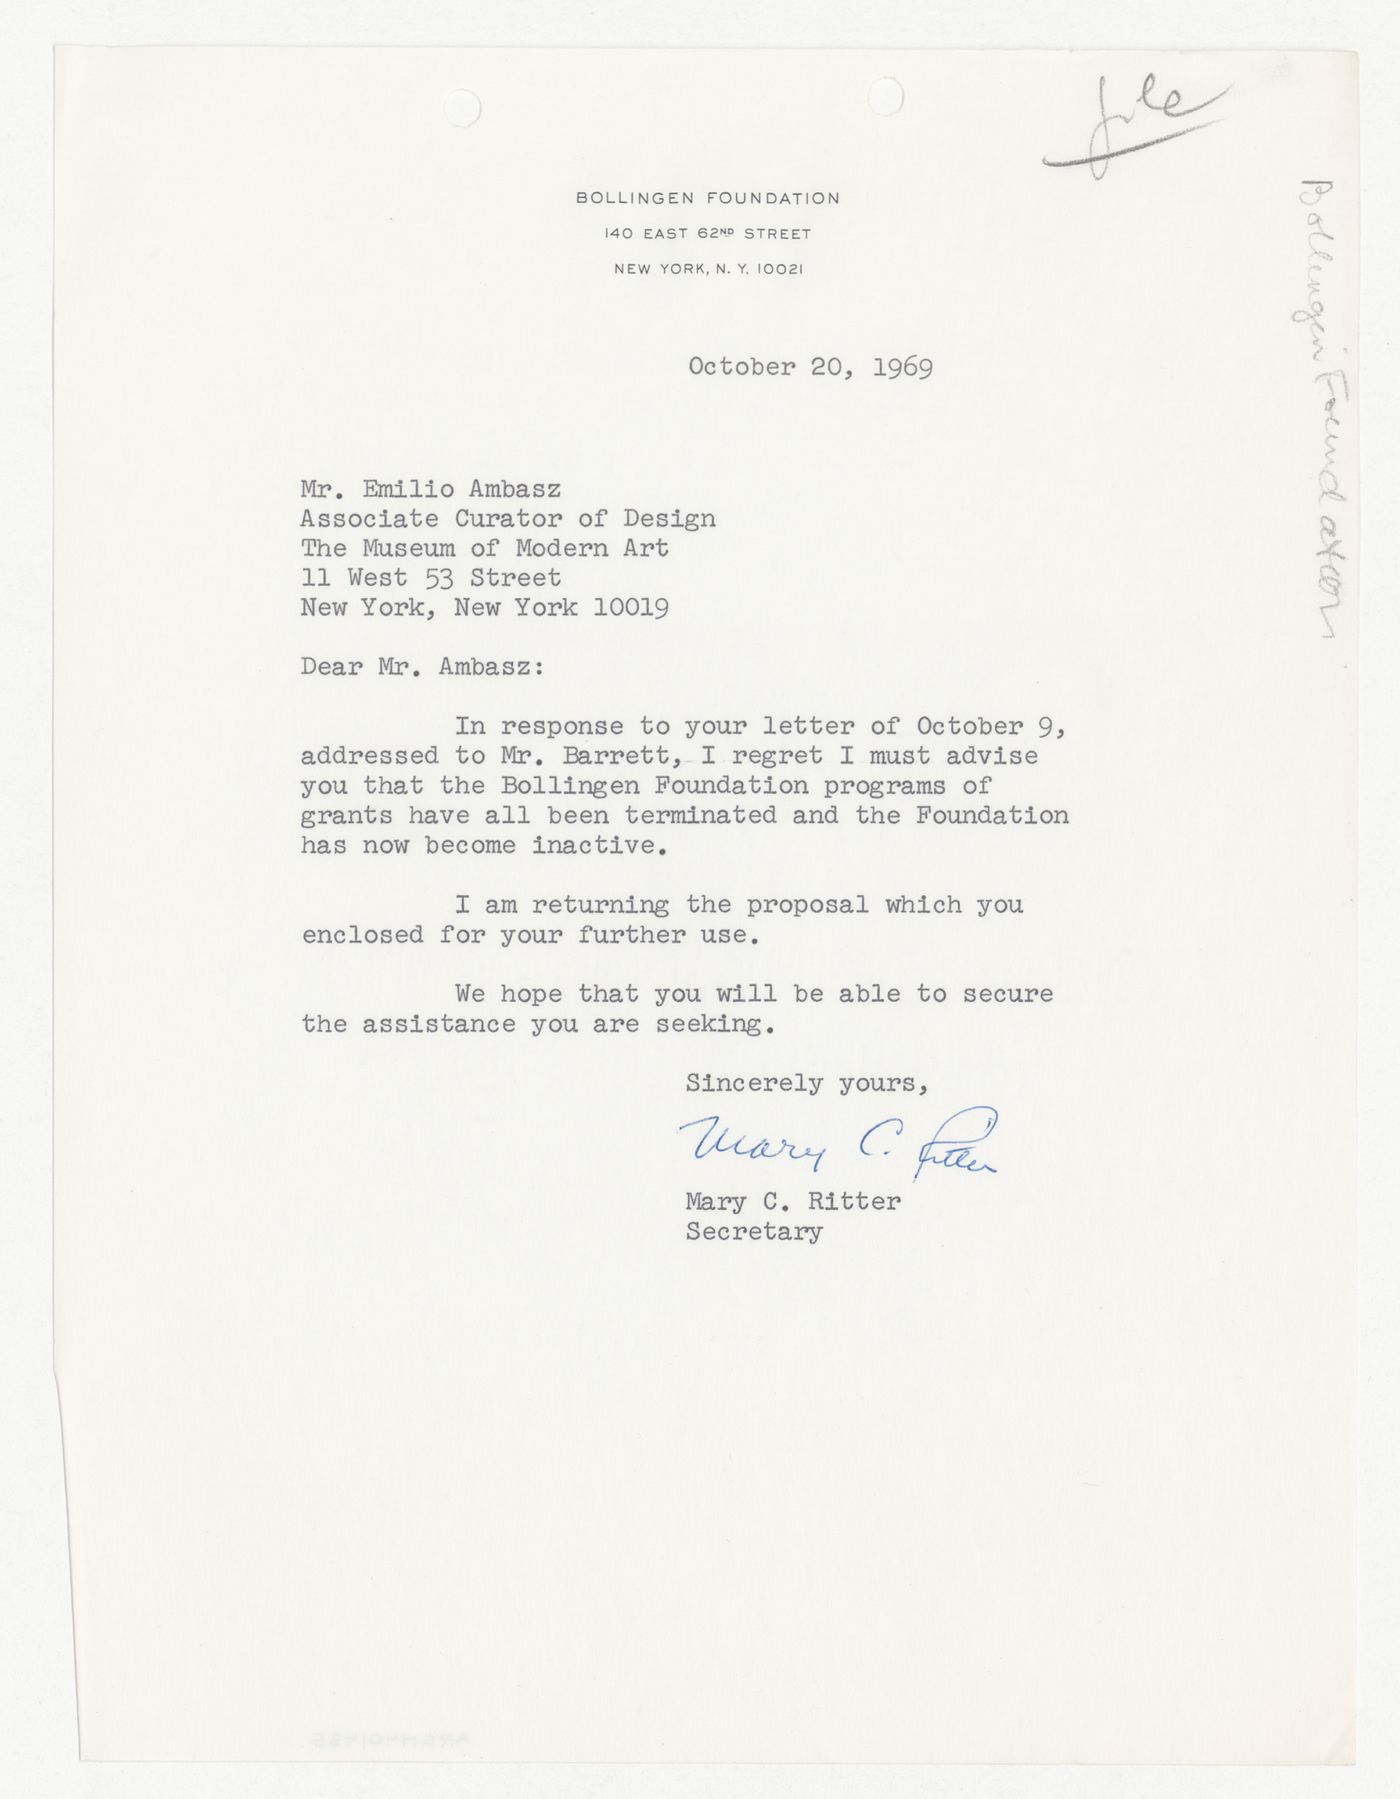 Letter from Mary C. Ritter to Emilio Ambasz responding to proposal for Institutions for a Post-Technological Society conference